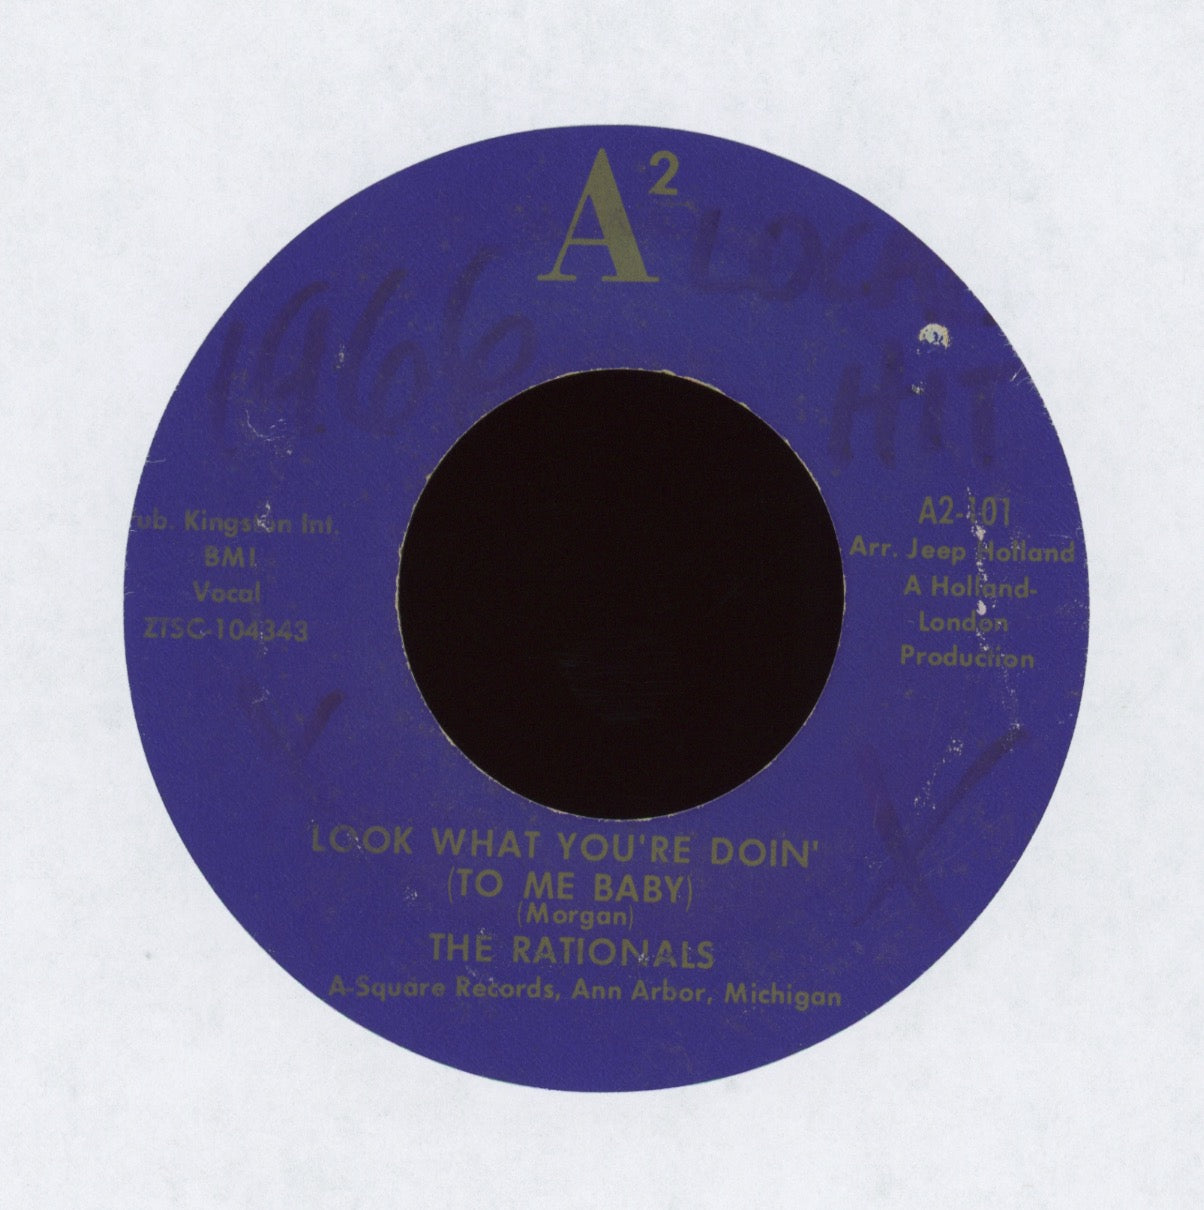 The Rationals - Look What You're Doin' (To Me Baby) on A2 Garage 45